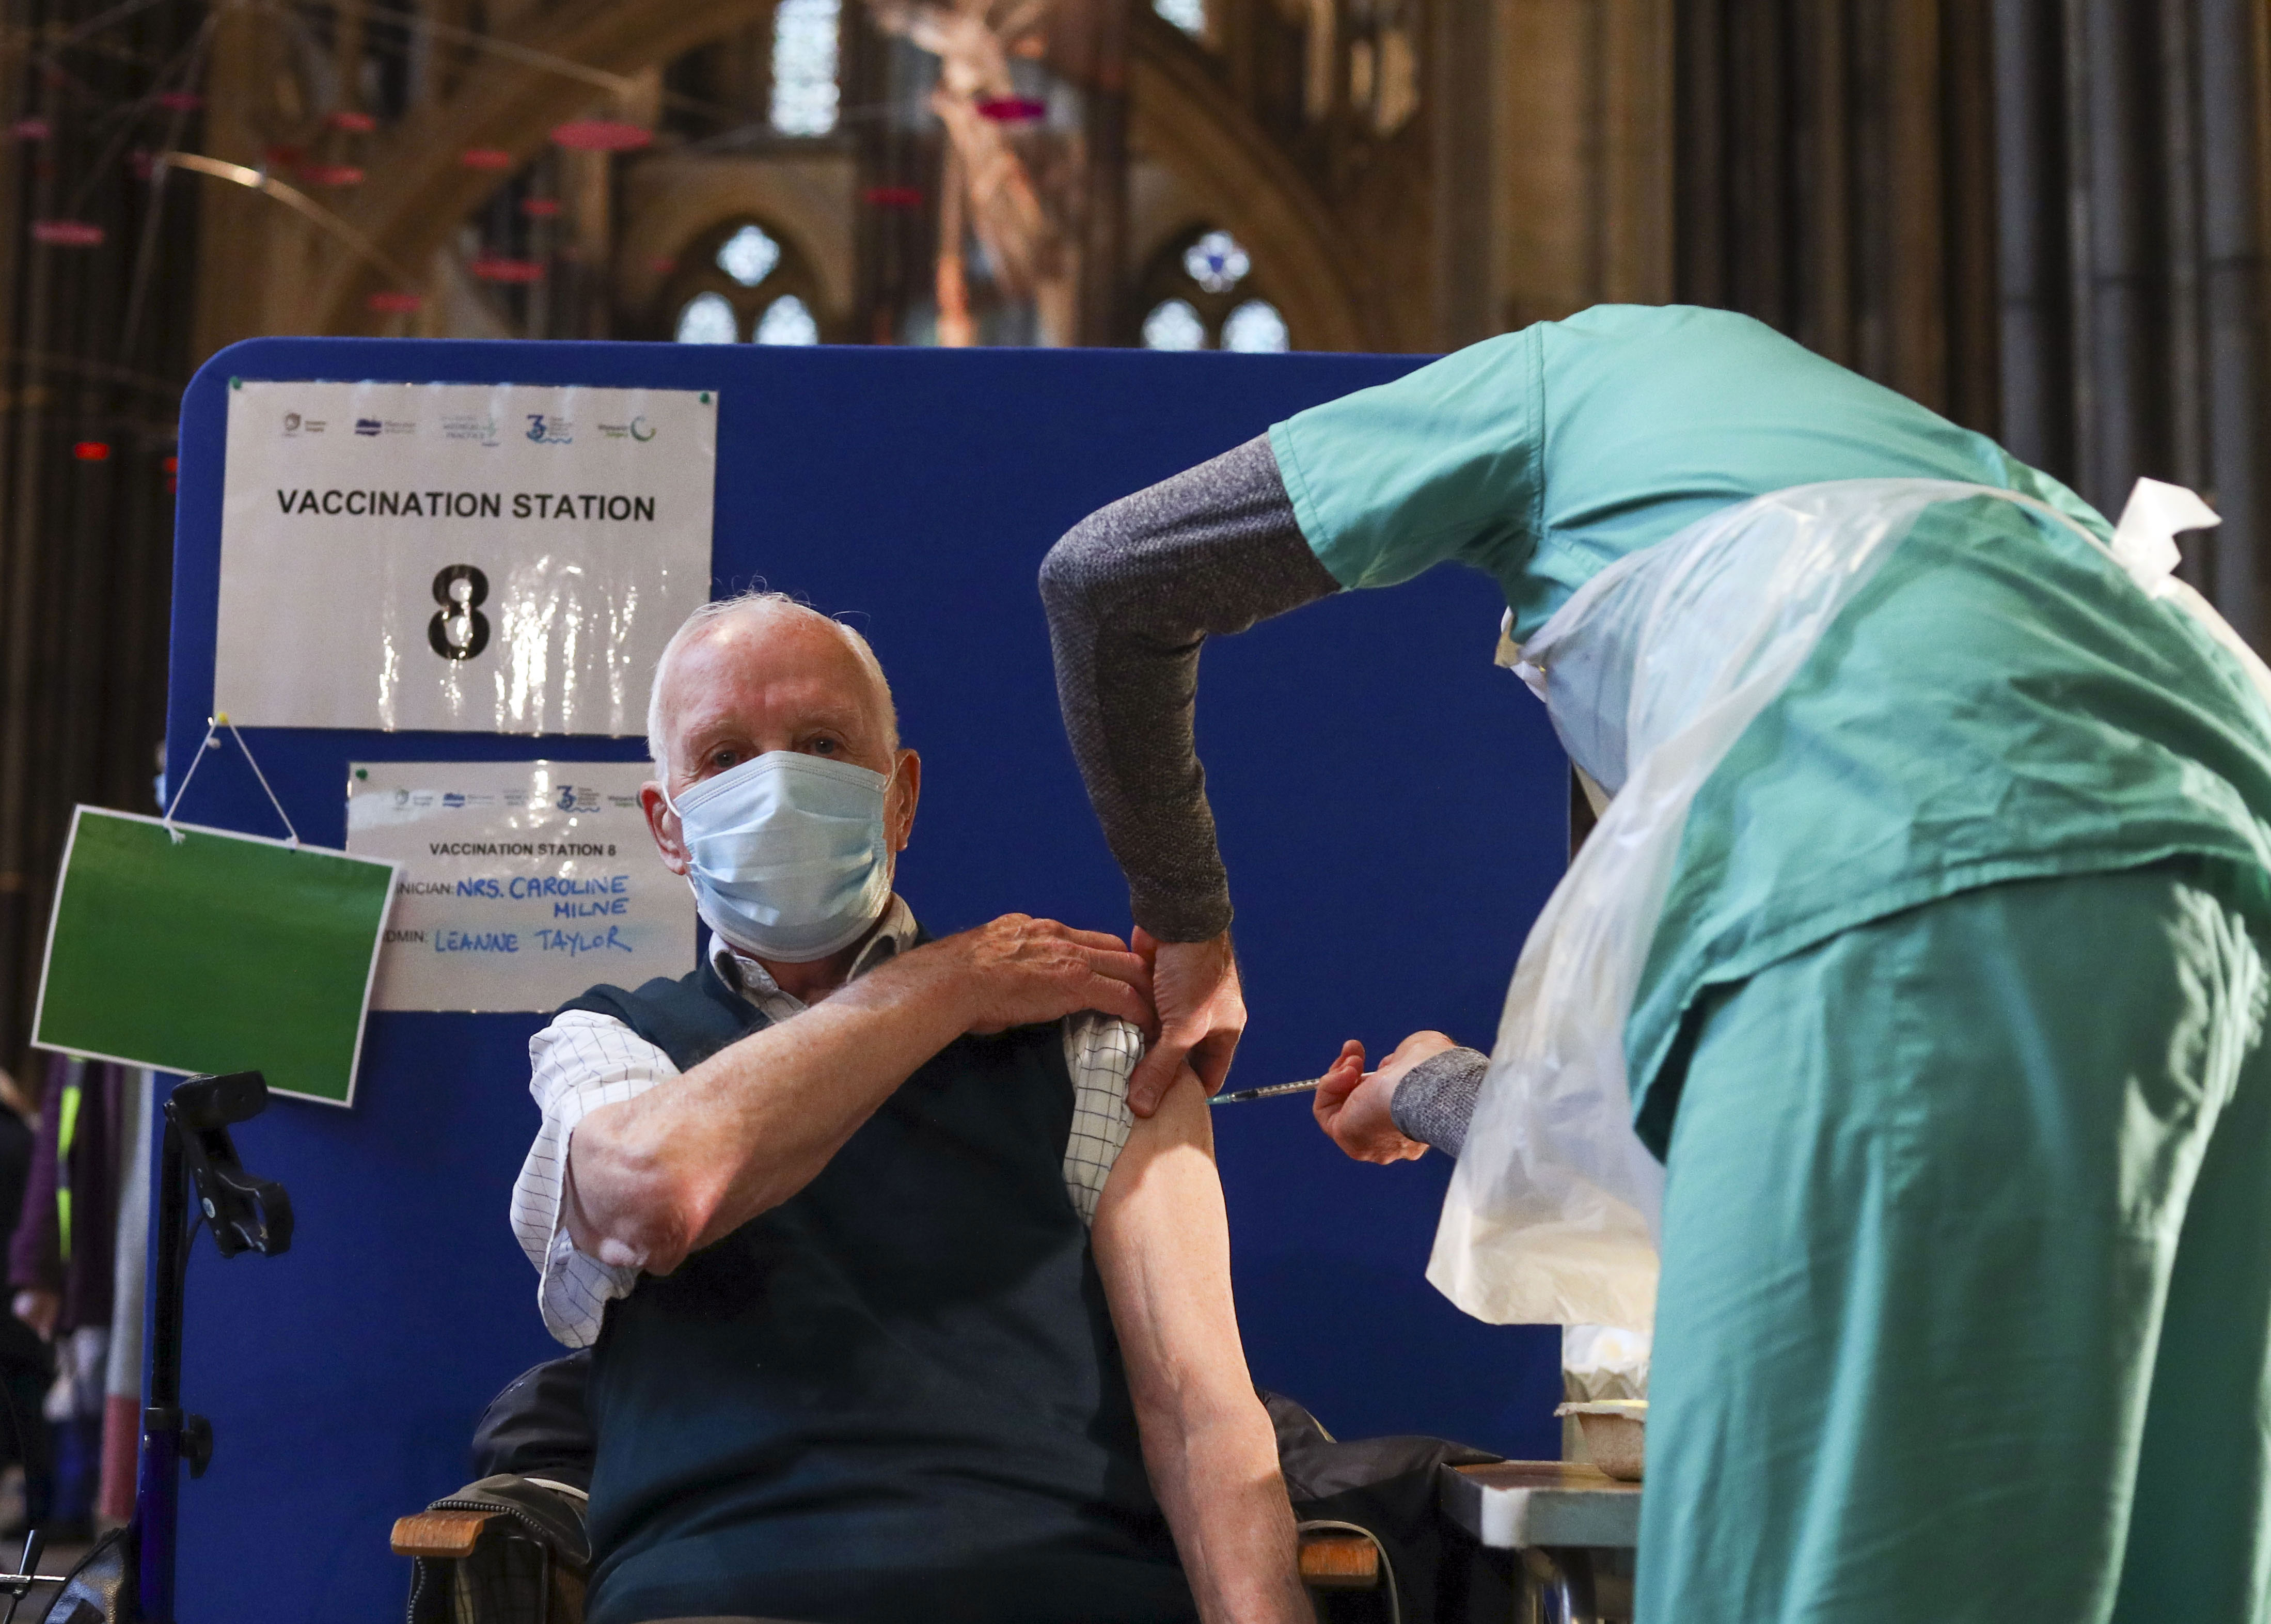 Louis Godwin, a former Royal Air Force flight sergeant, receives an injection of the Pfizer/BioNTech Covid-19 vaccine at Salisbury Cathedral in England on January 16.